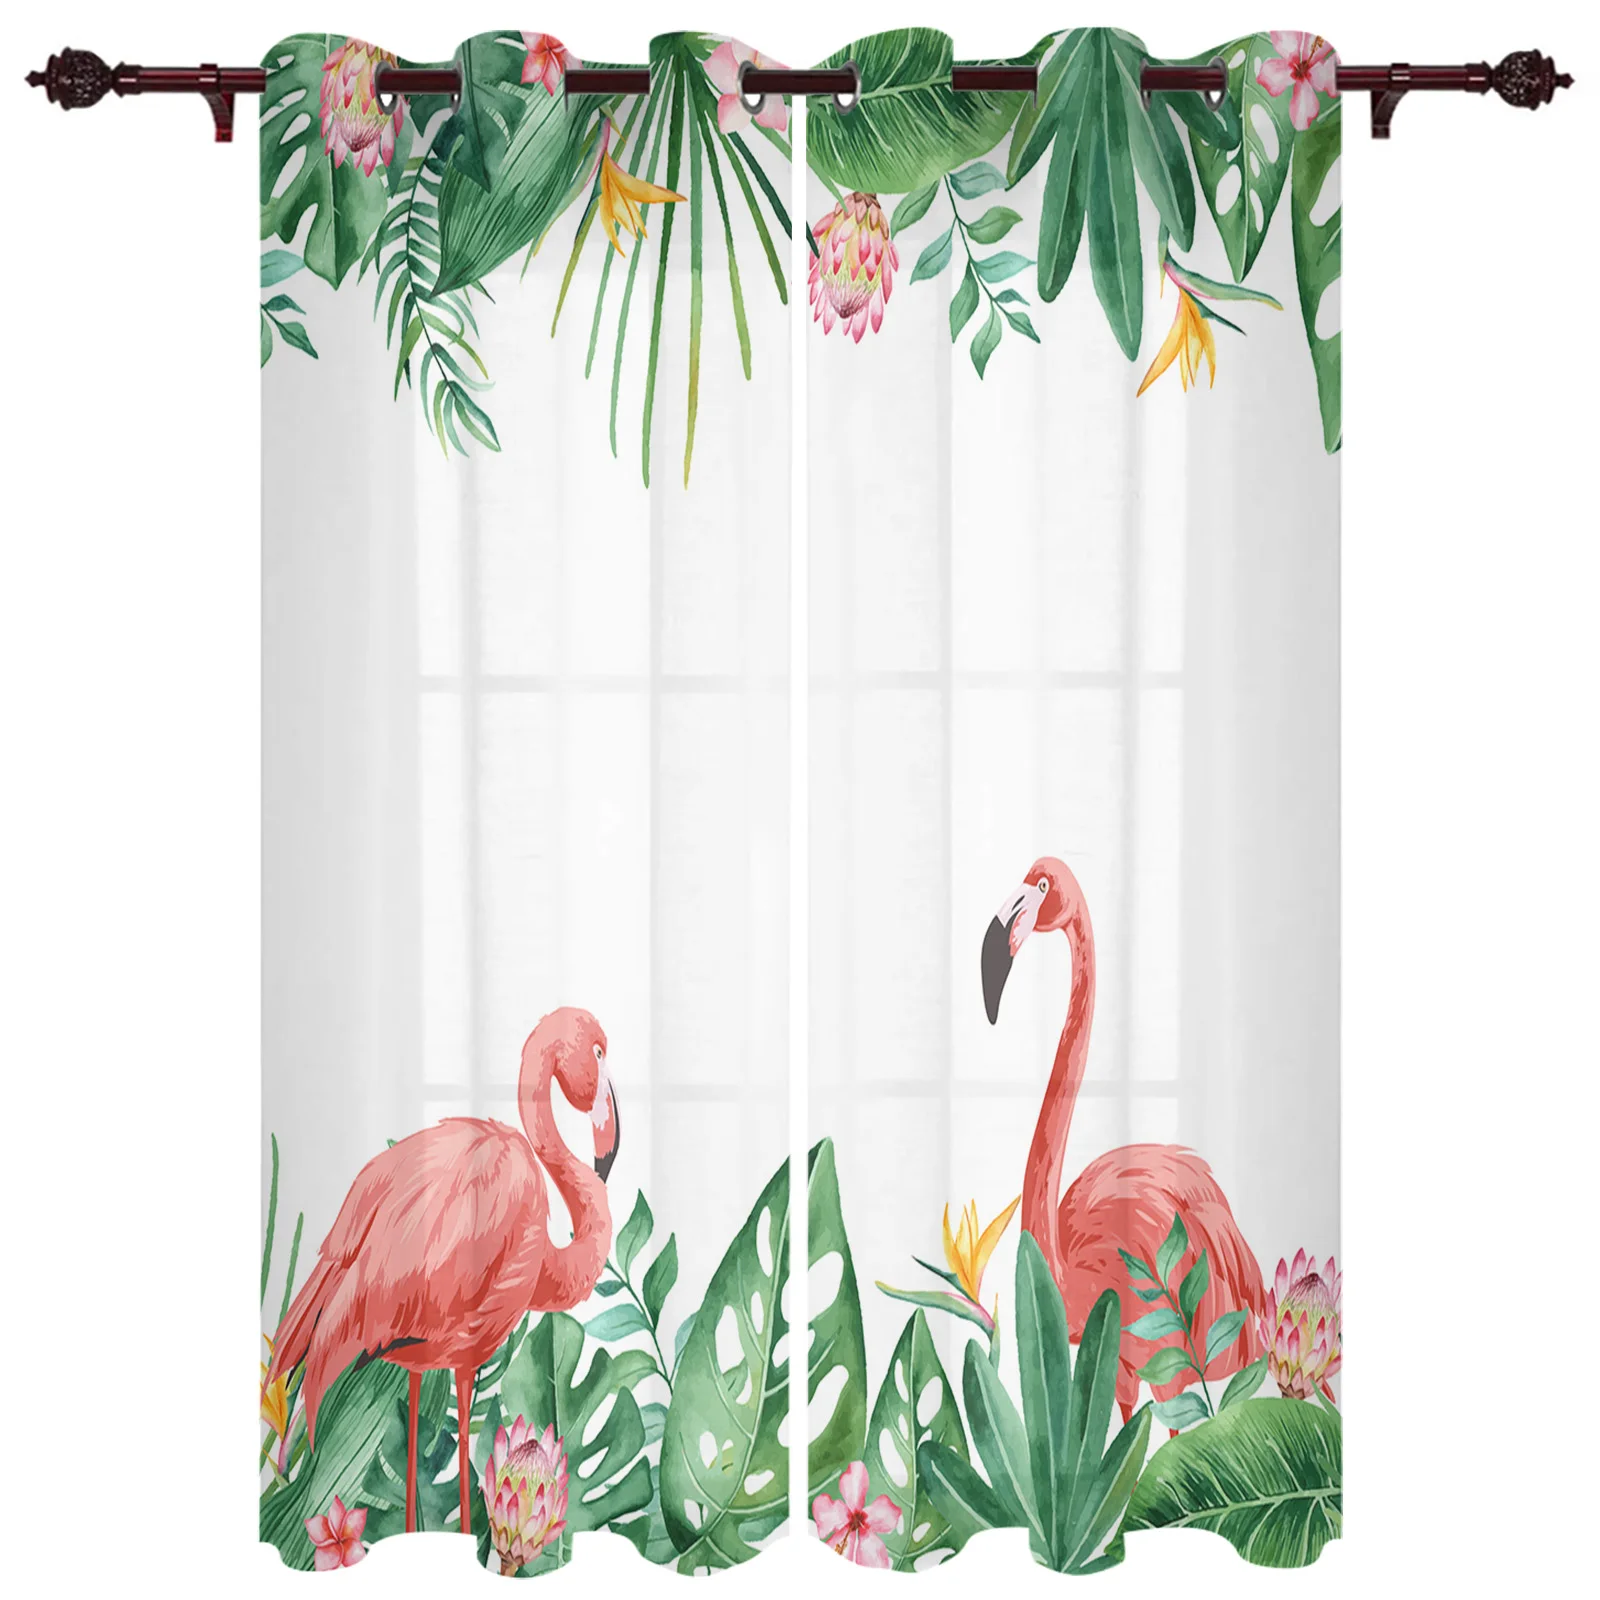 

Tropical Plants Flamingos Palm Leaves Curtains for Bedroom Living Room Window Curtain Treatments Blinds Kitchen Decor Drapes